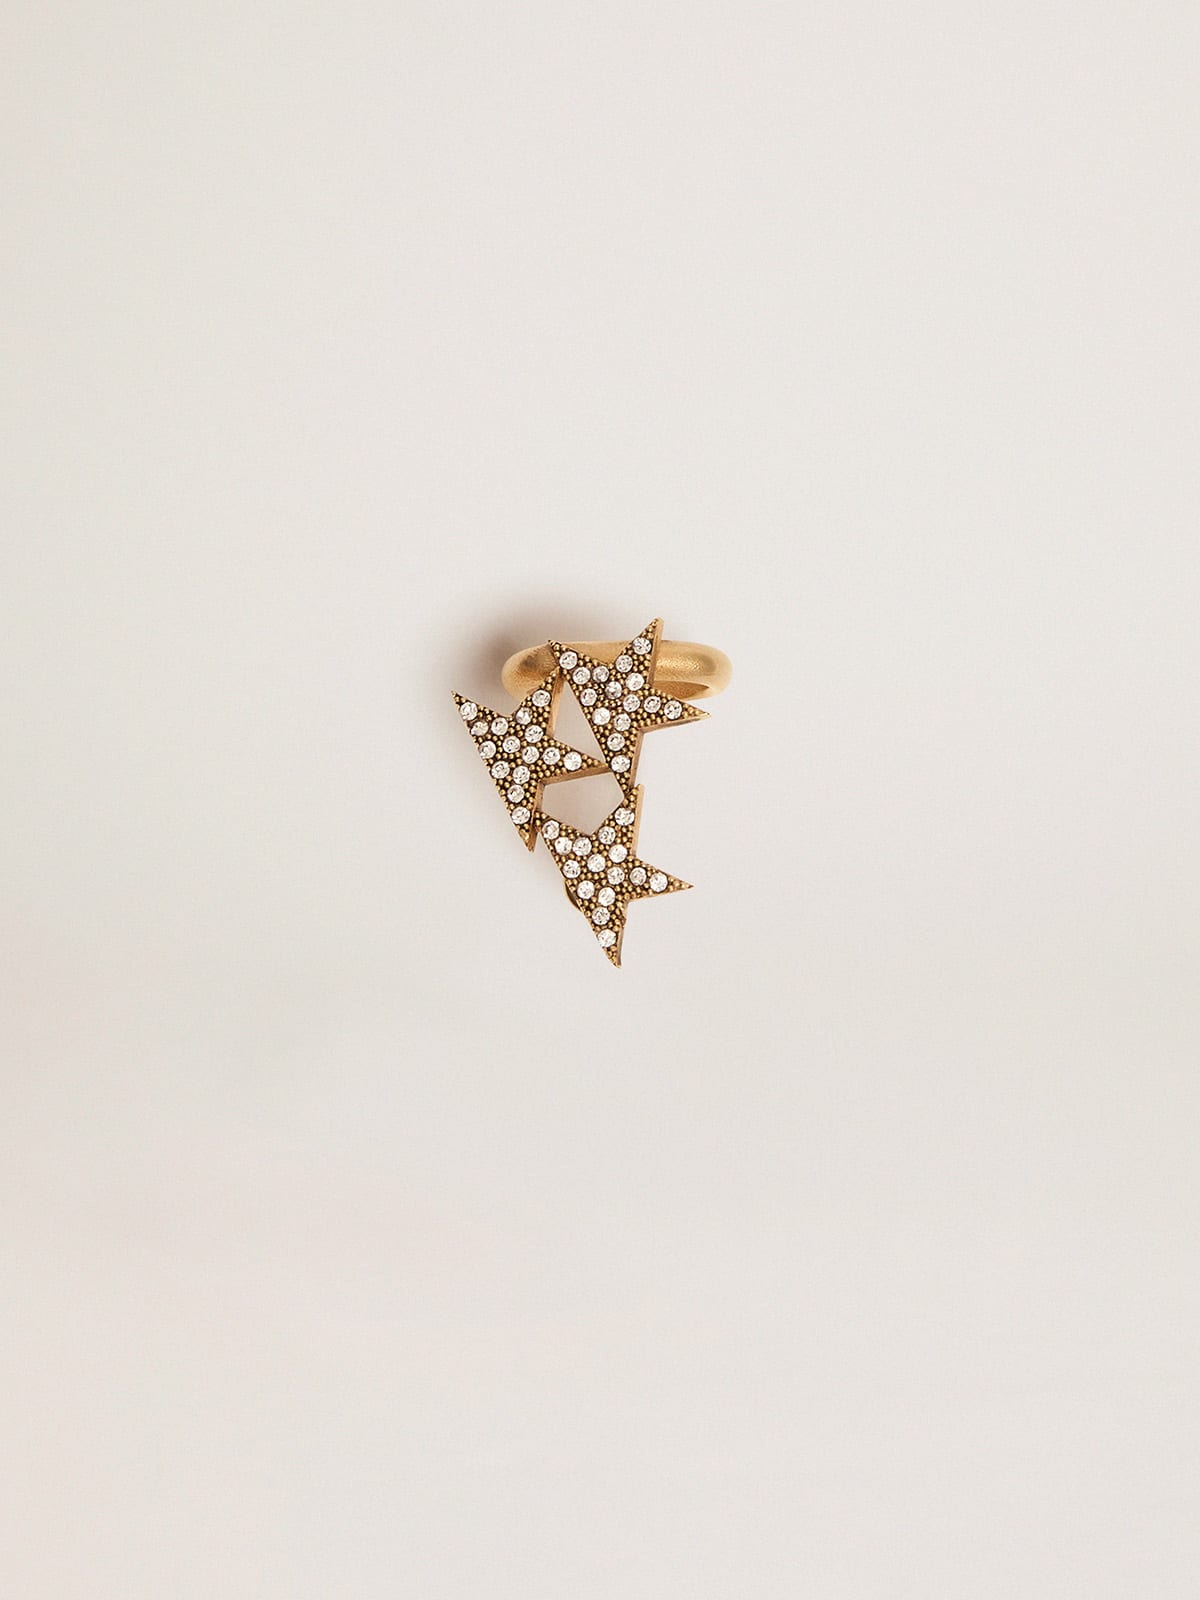 Golden Goose - Star Jewelmates Collection ear cuff single drop earring in old gold color with decorative crystals in 